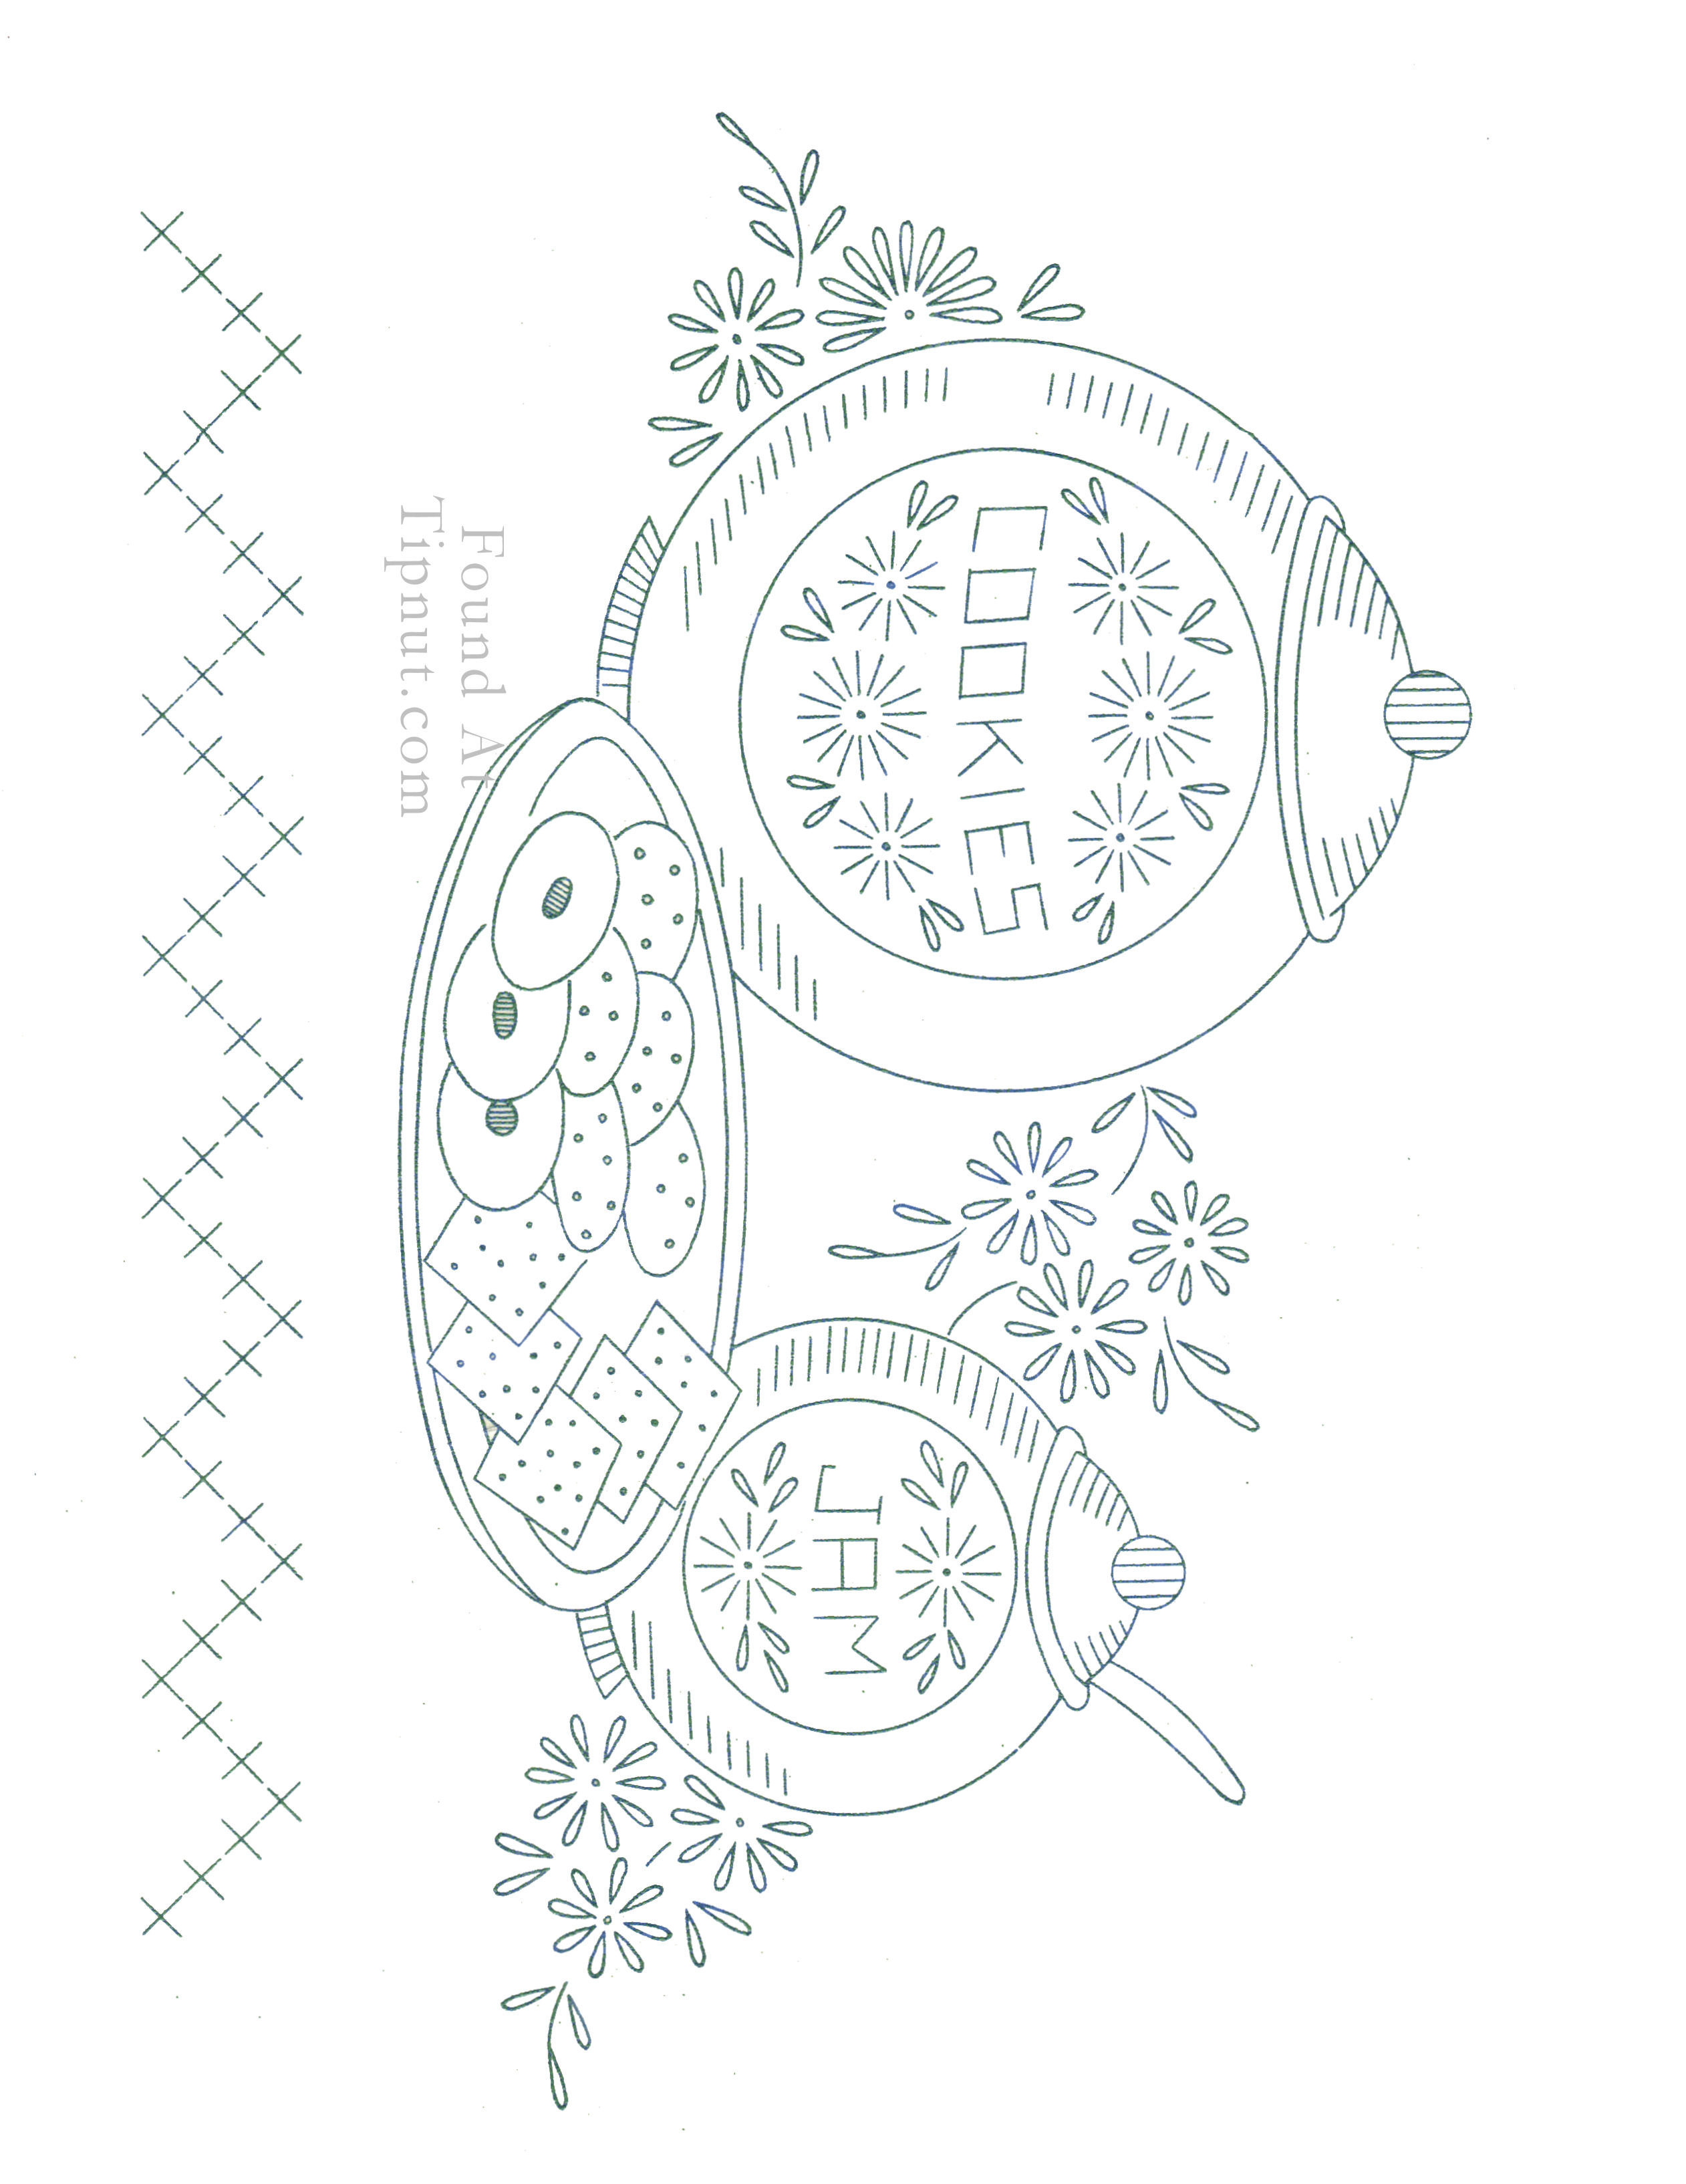 Retro Embroidery Patterns Vintage Embroidery Designs Dishware Set Tipnut